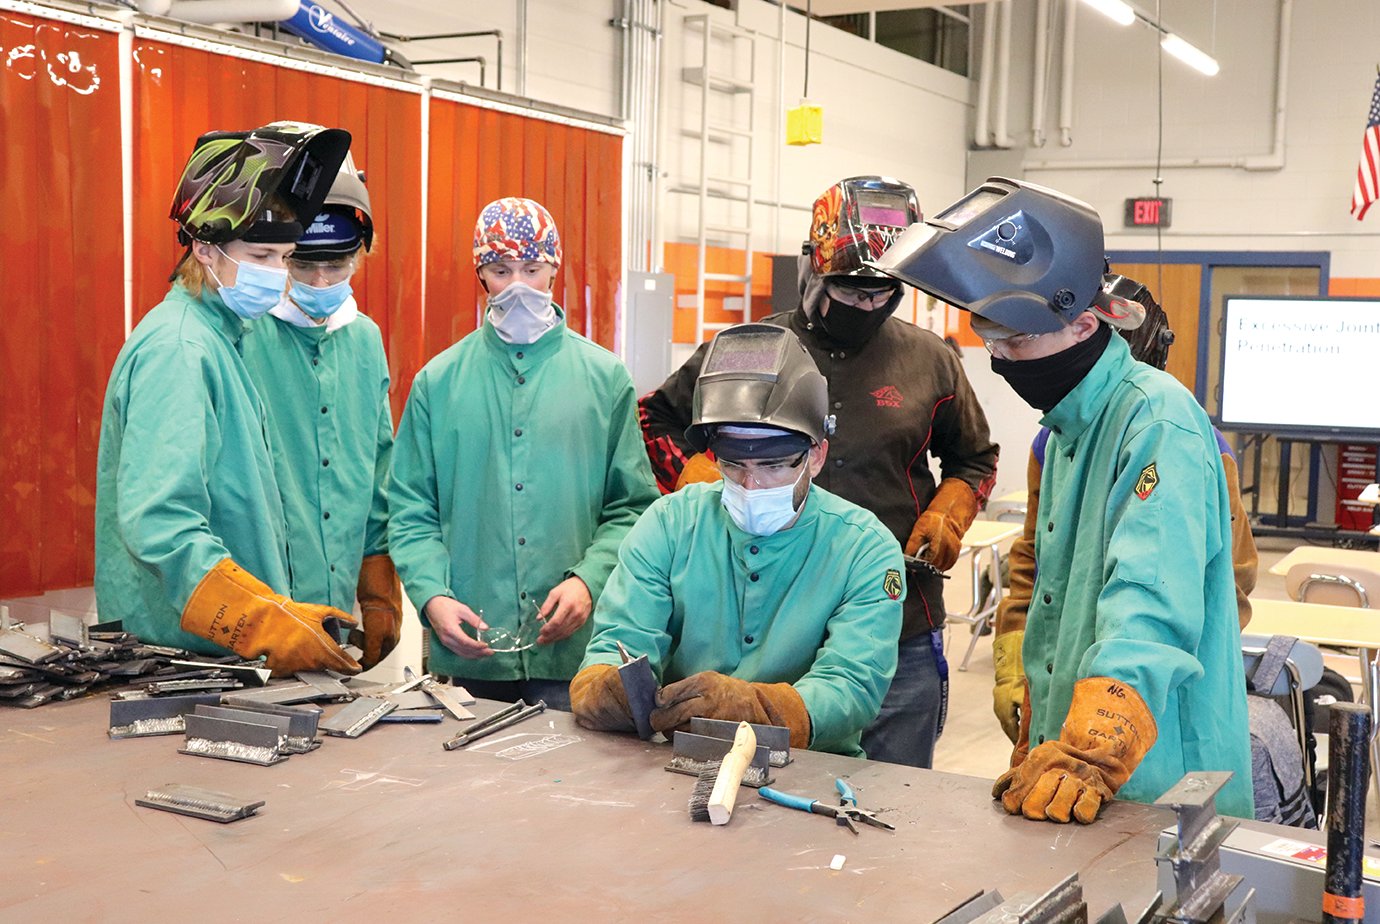 Students enrolled in a new welding program at North Montgomery High School, in collaboration with West Central Indiana Career and Technical Education Center, observe the technique of veteran instructor Jeff Harp, seated, inside the school's renovated manufacturing wing. Students alongside Harp include Gavin Haltom, from left, Noah Hudeson, Sean Kilgour, Jarrett Weder, Timothy Coffman and Nate Gray.